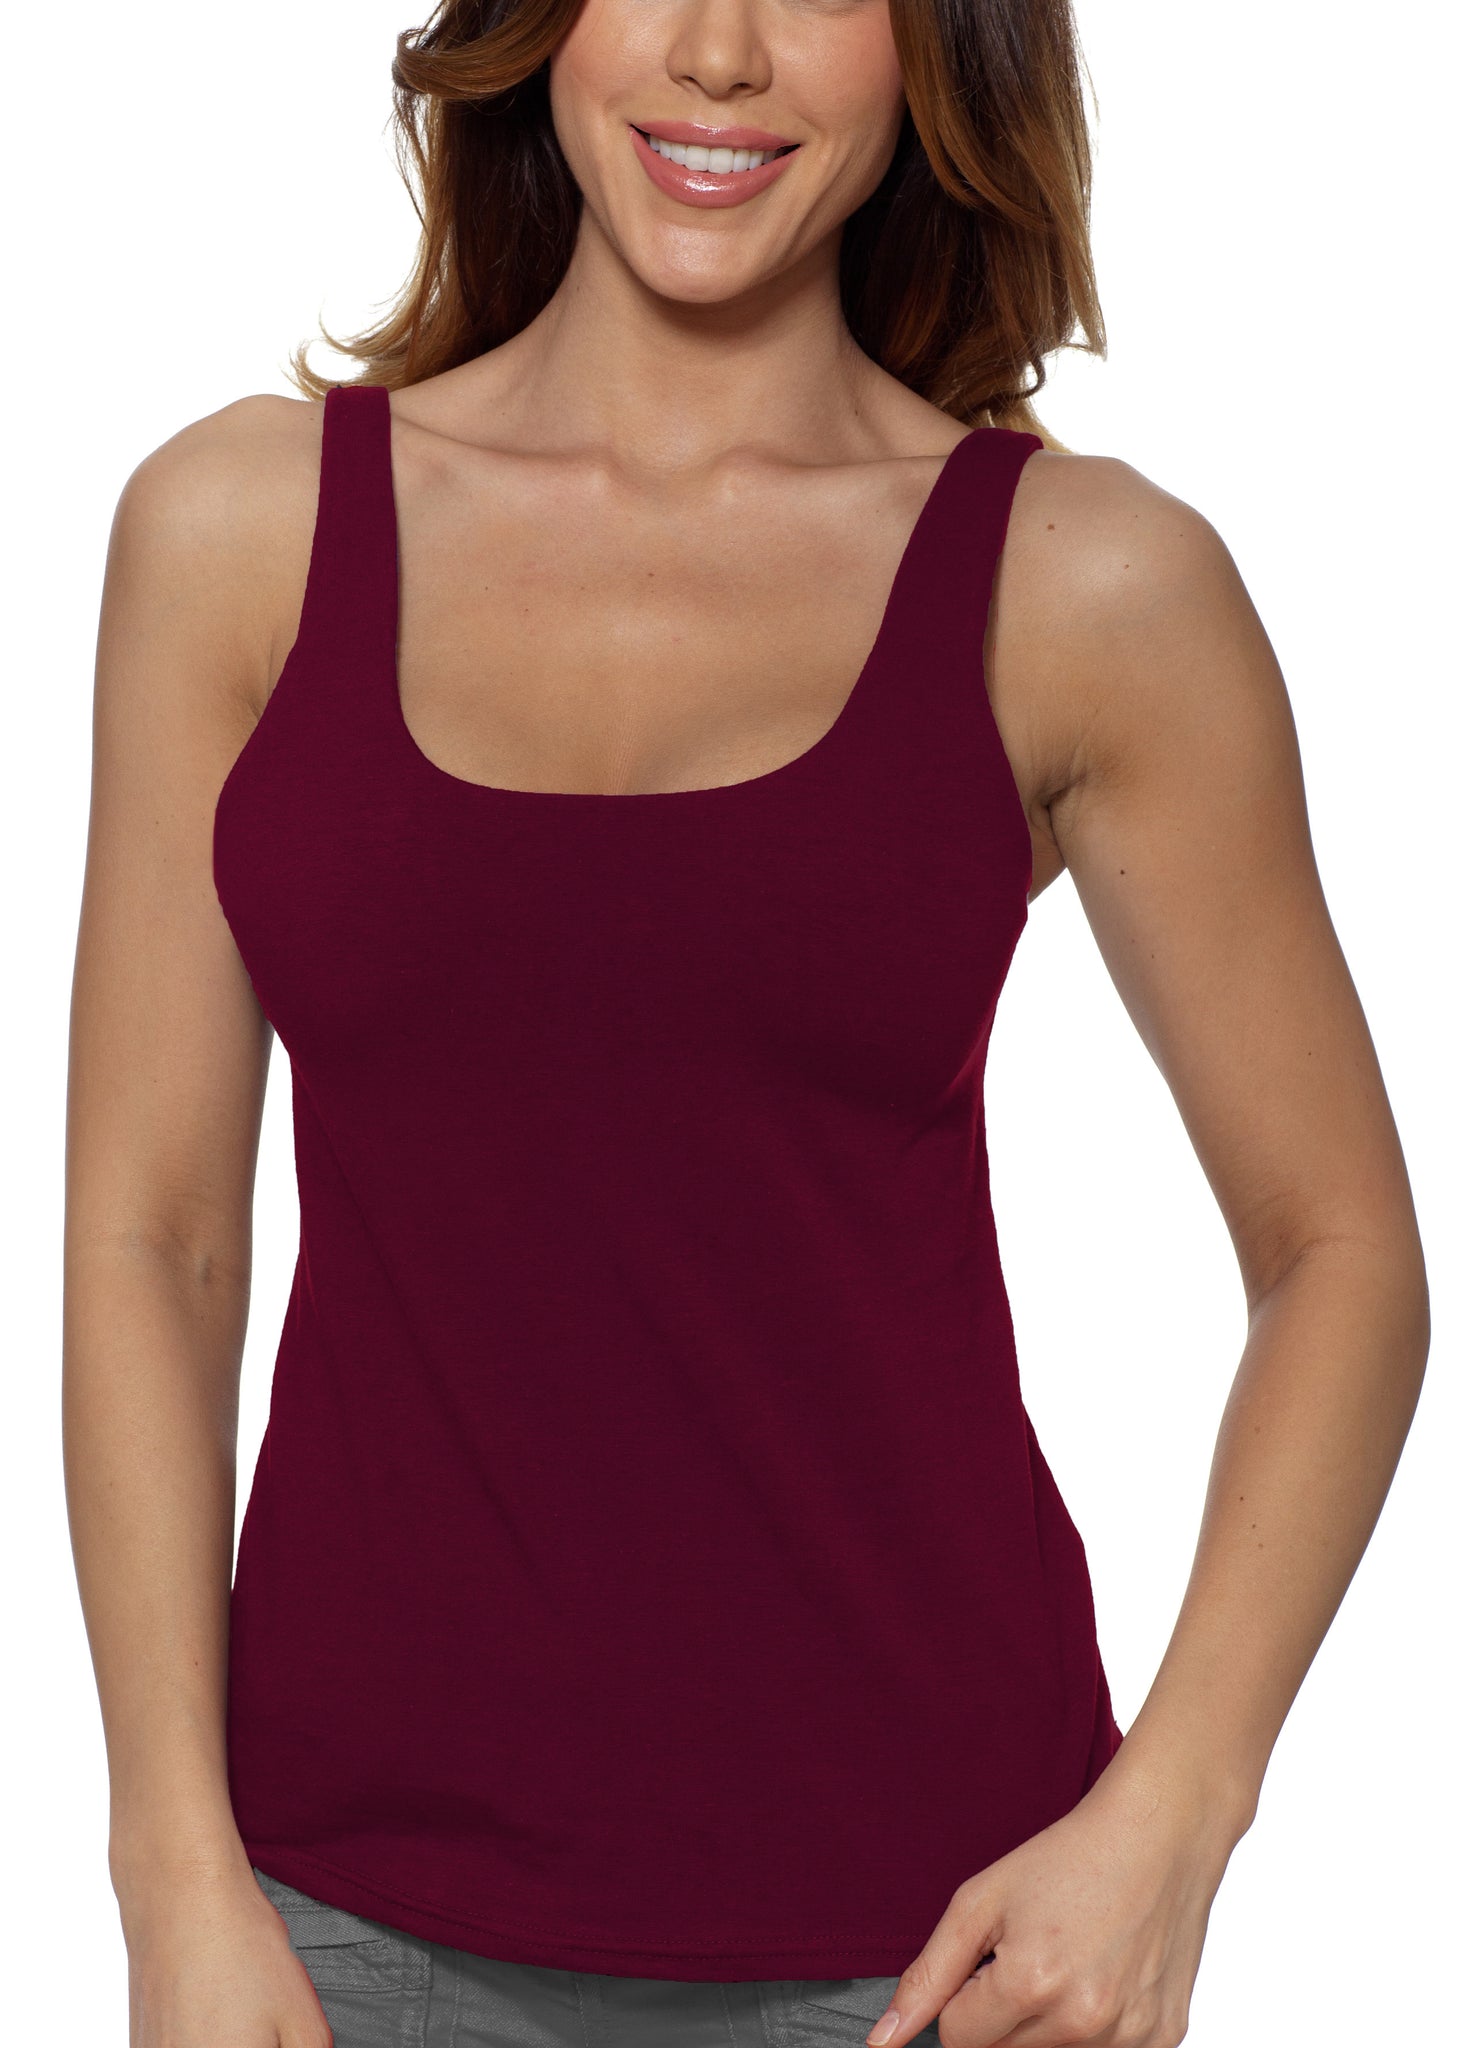 Red Lip Sports Bra for Women, Seamless Camisole Tank Top,Padded